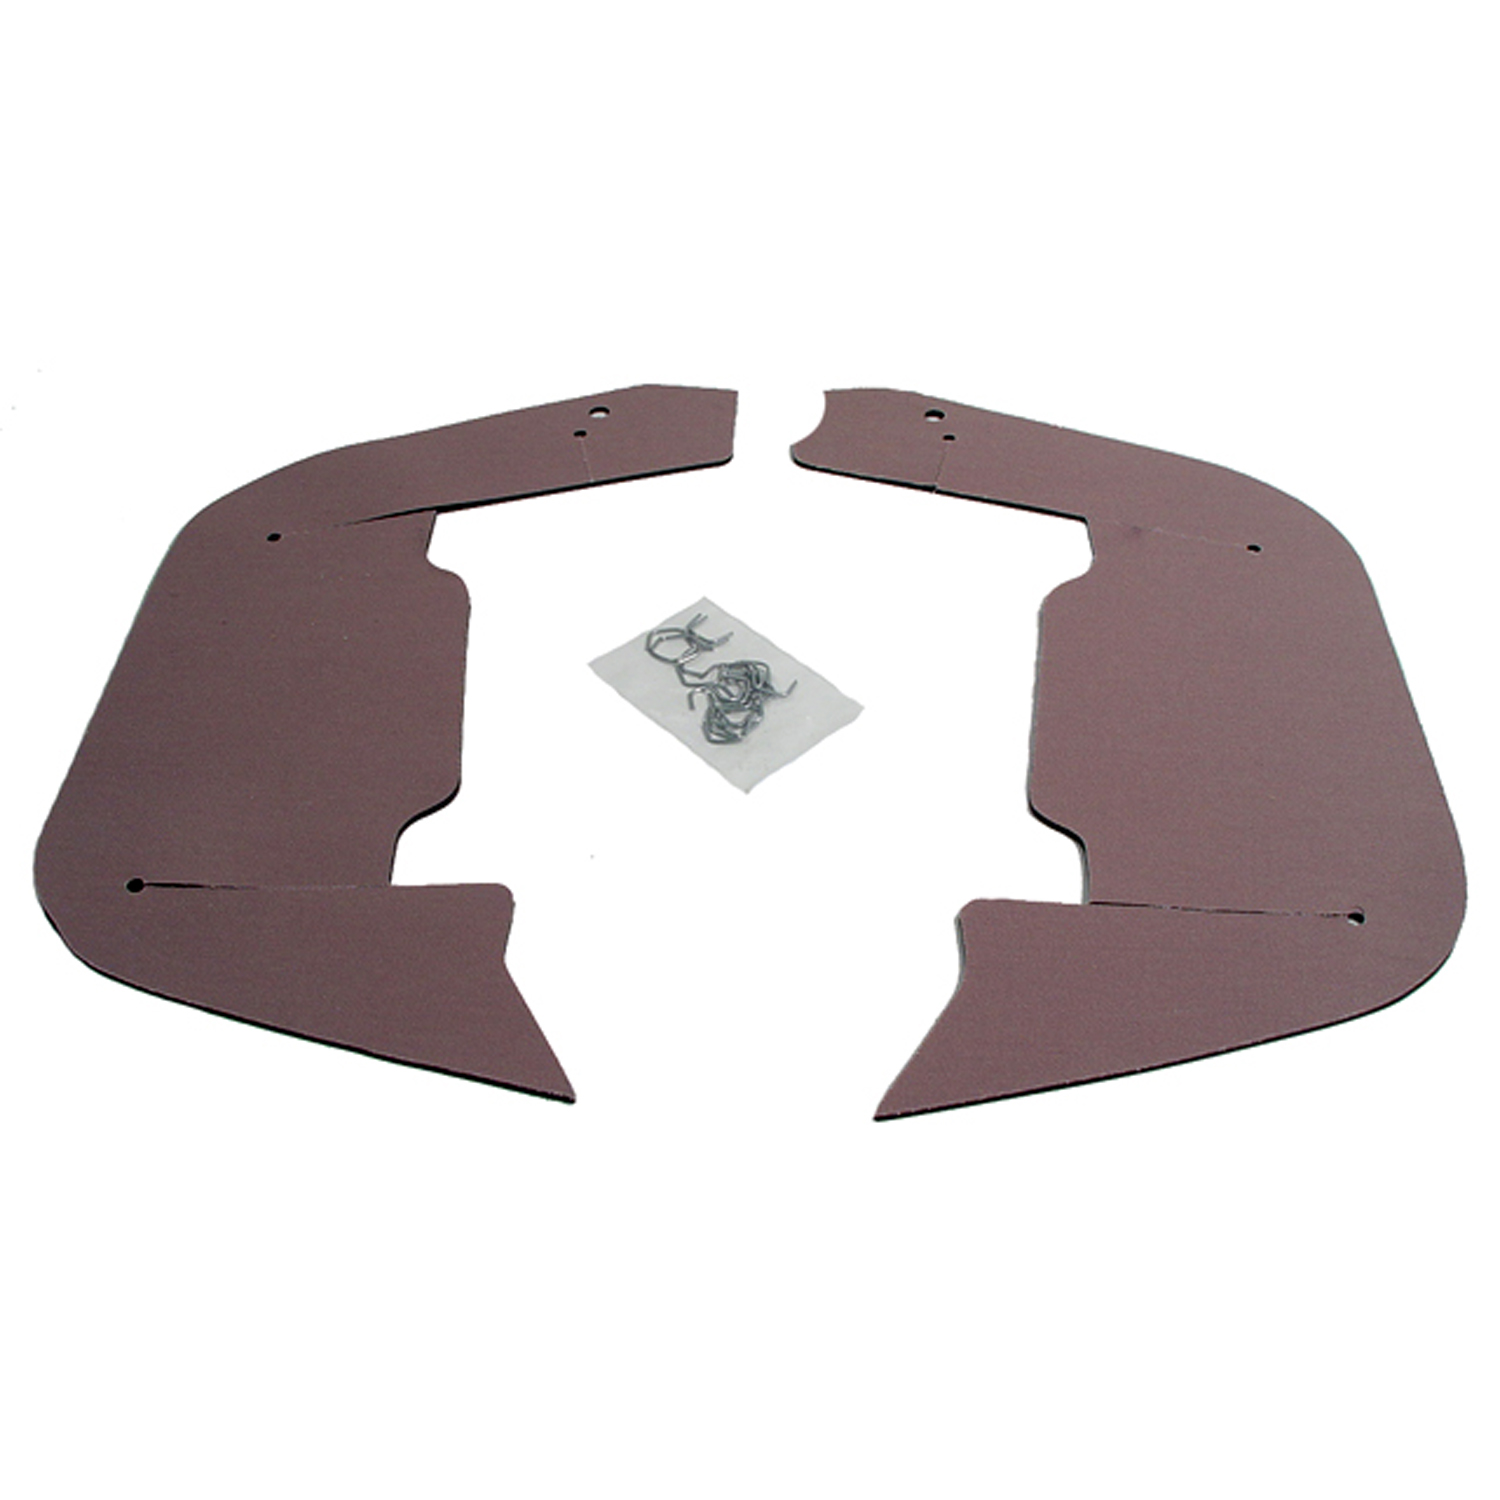 1956 Chevrolet One-Fifty Series Inner Splash Flaps.  Made with cloth backing-SI 2004-201